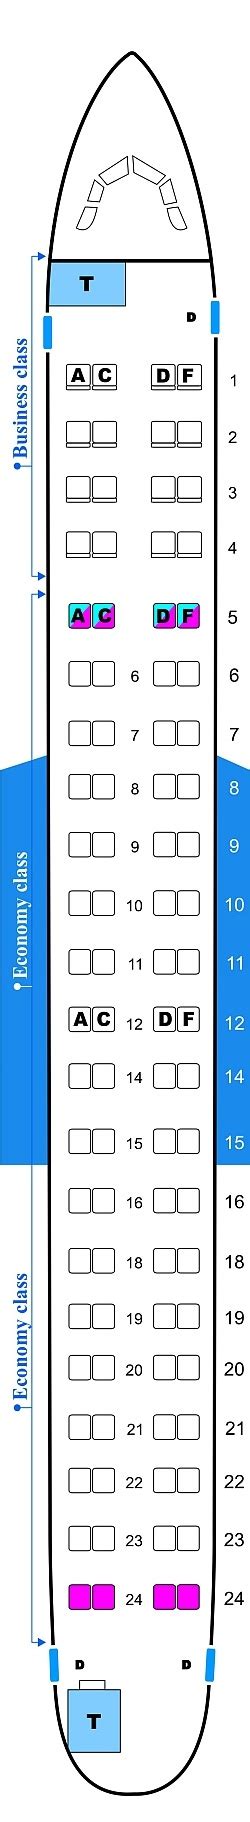 Airline Seating Charts Best Airplane Seats Seatmaestro Best Airplane Airline Seats